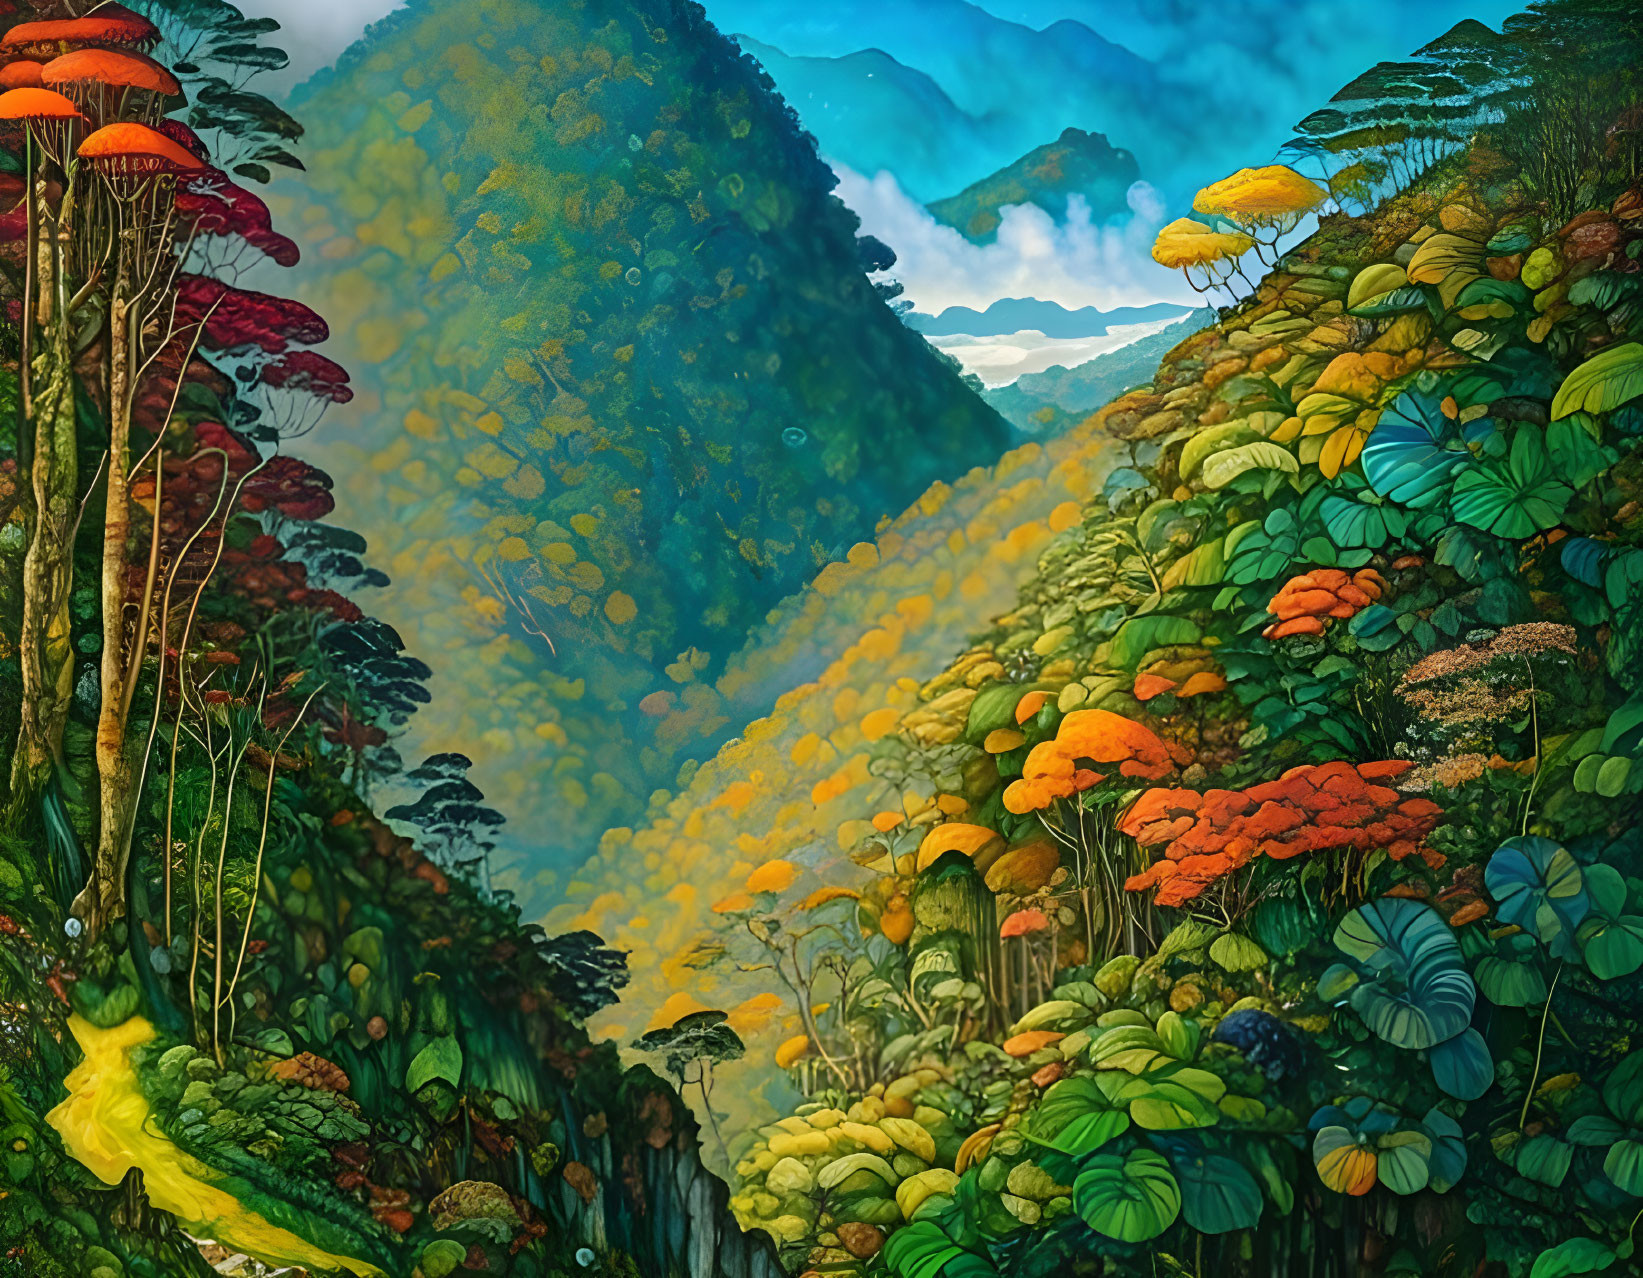 Colorful surreal forest with oversized mushrooms and misty mountains in the background